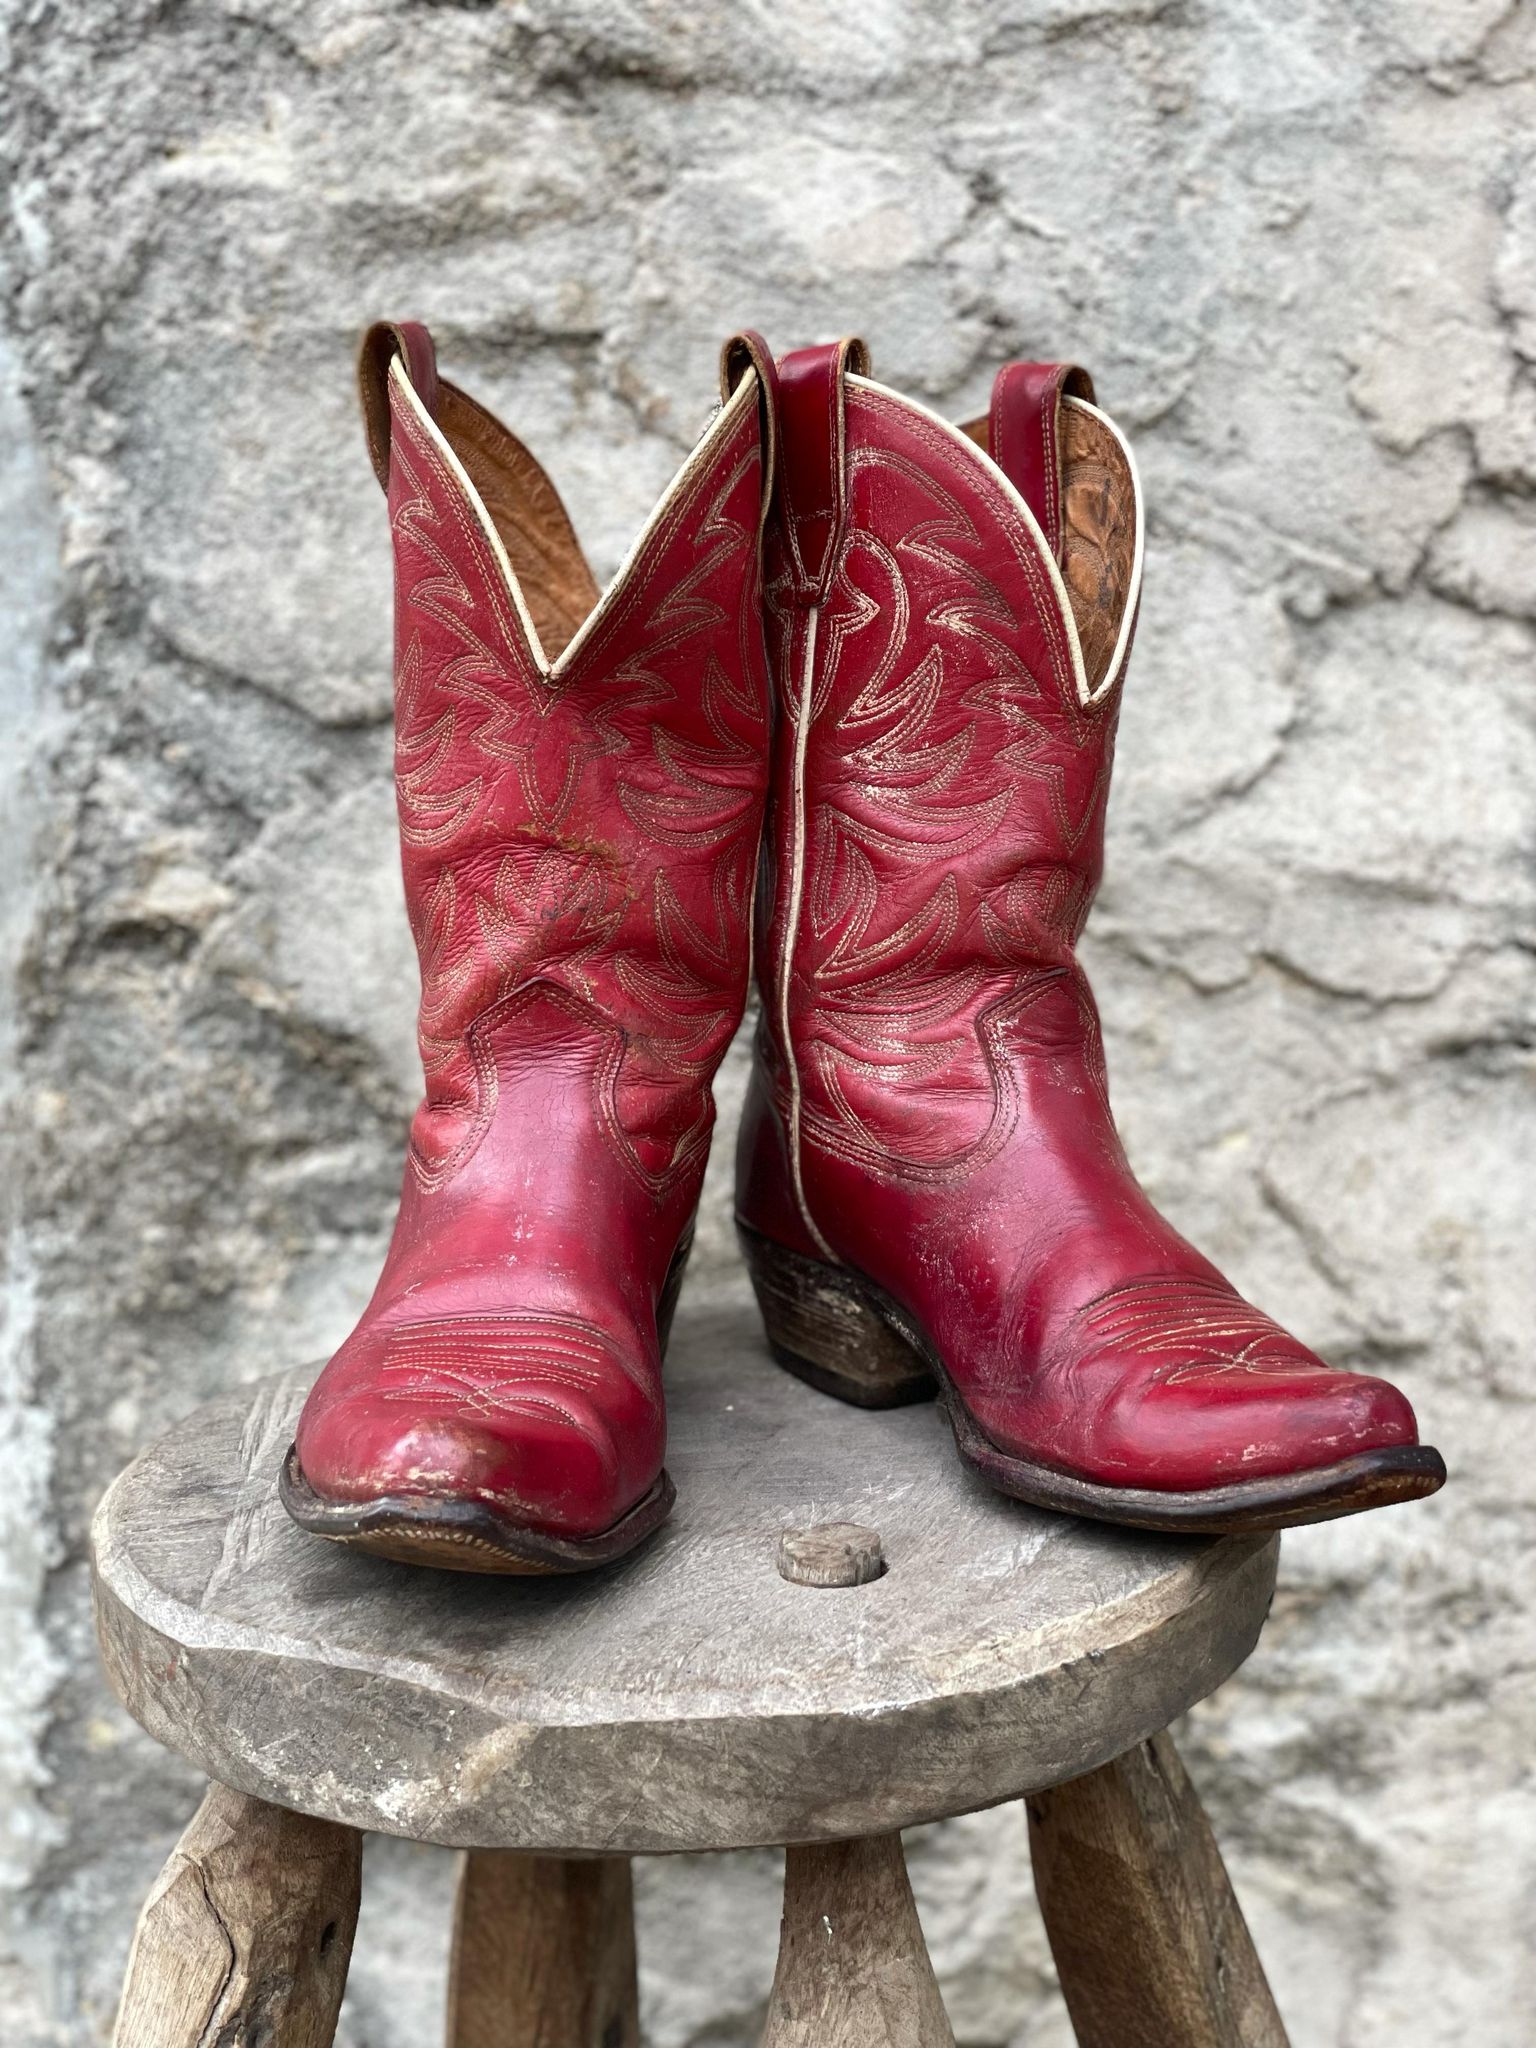 Vintage Red Cowboy Boots